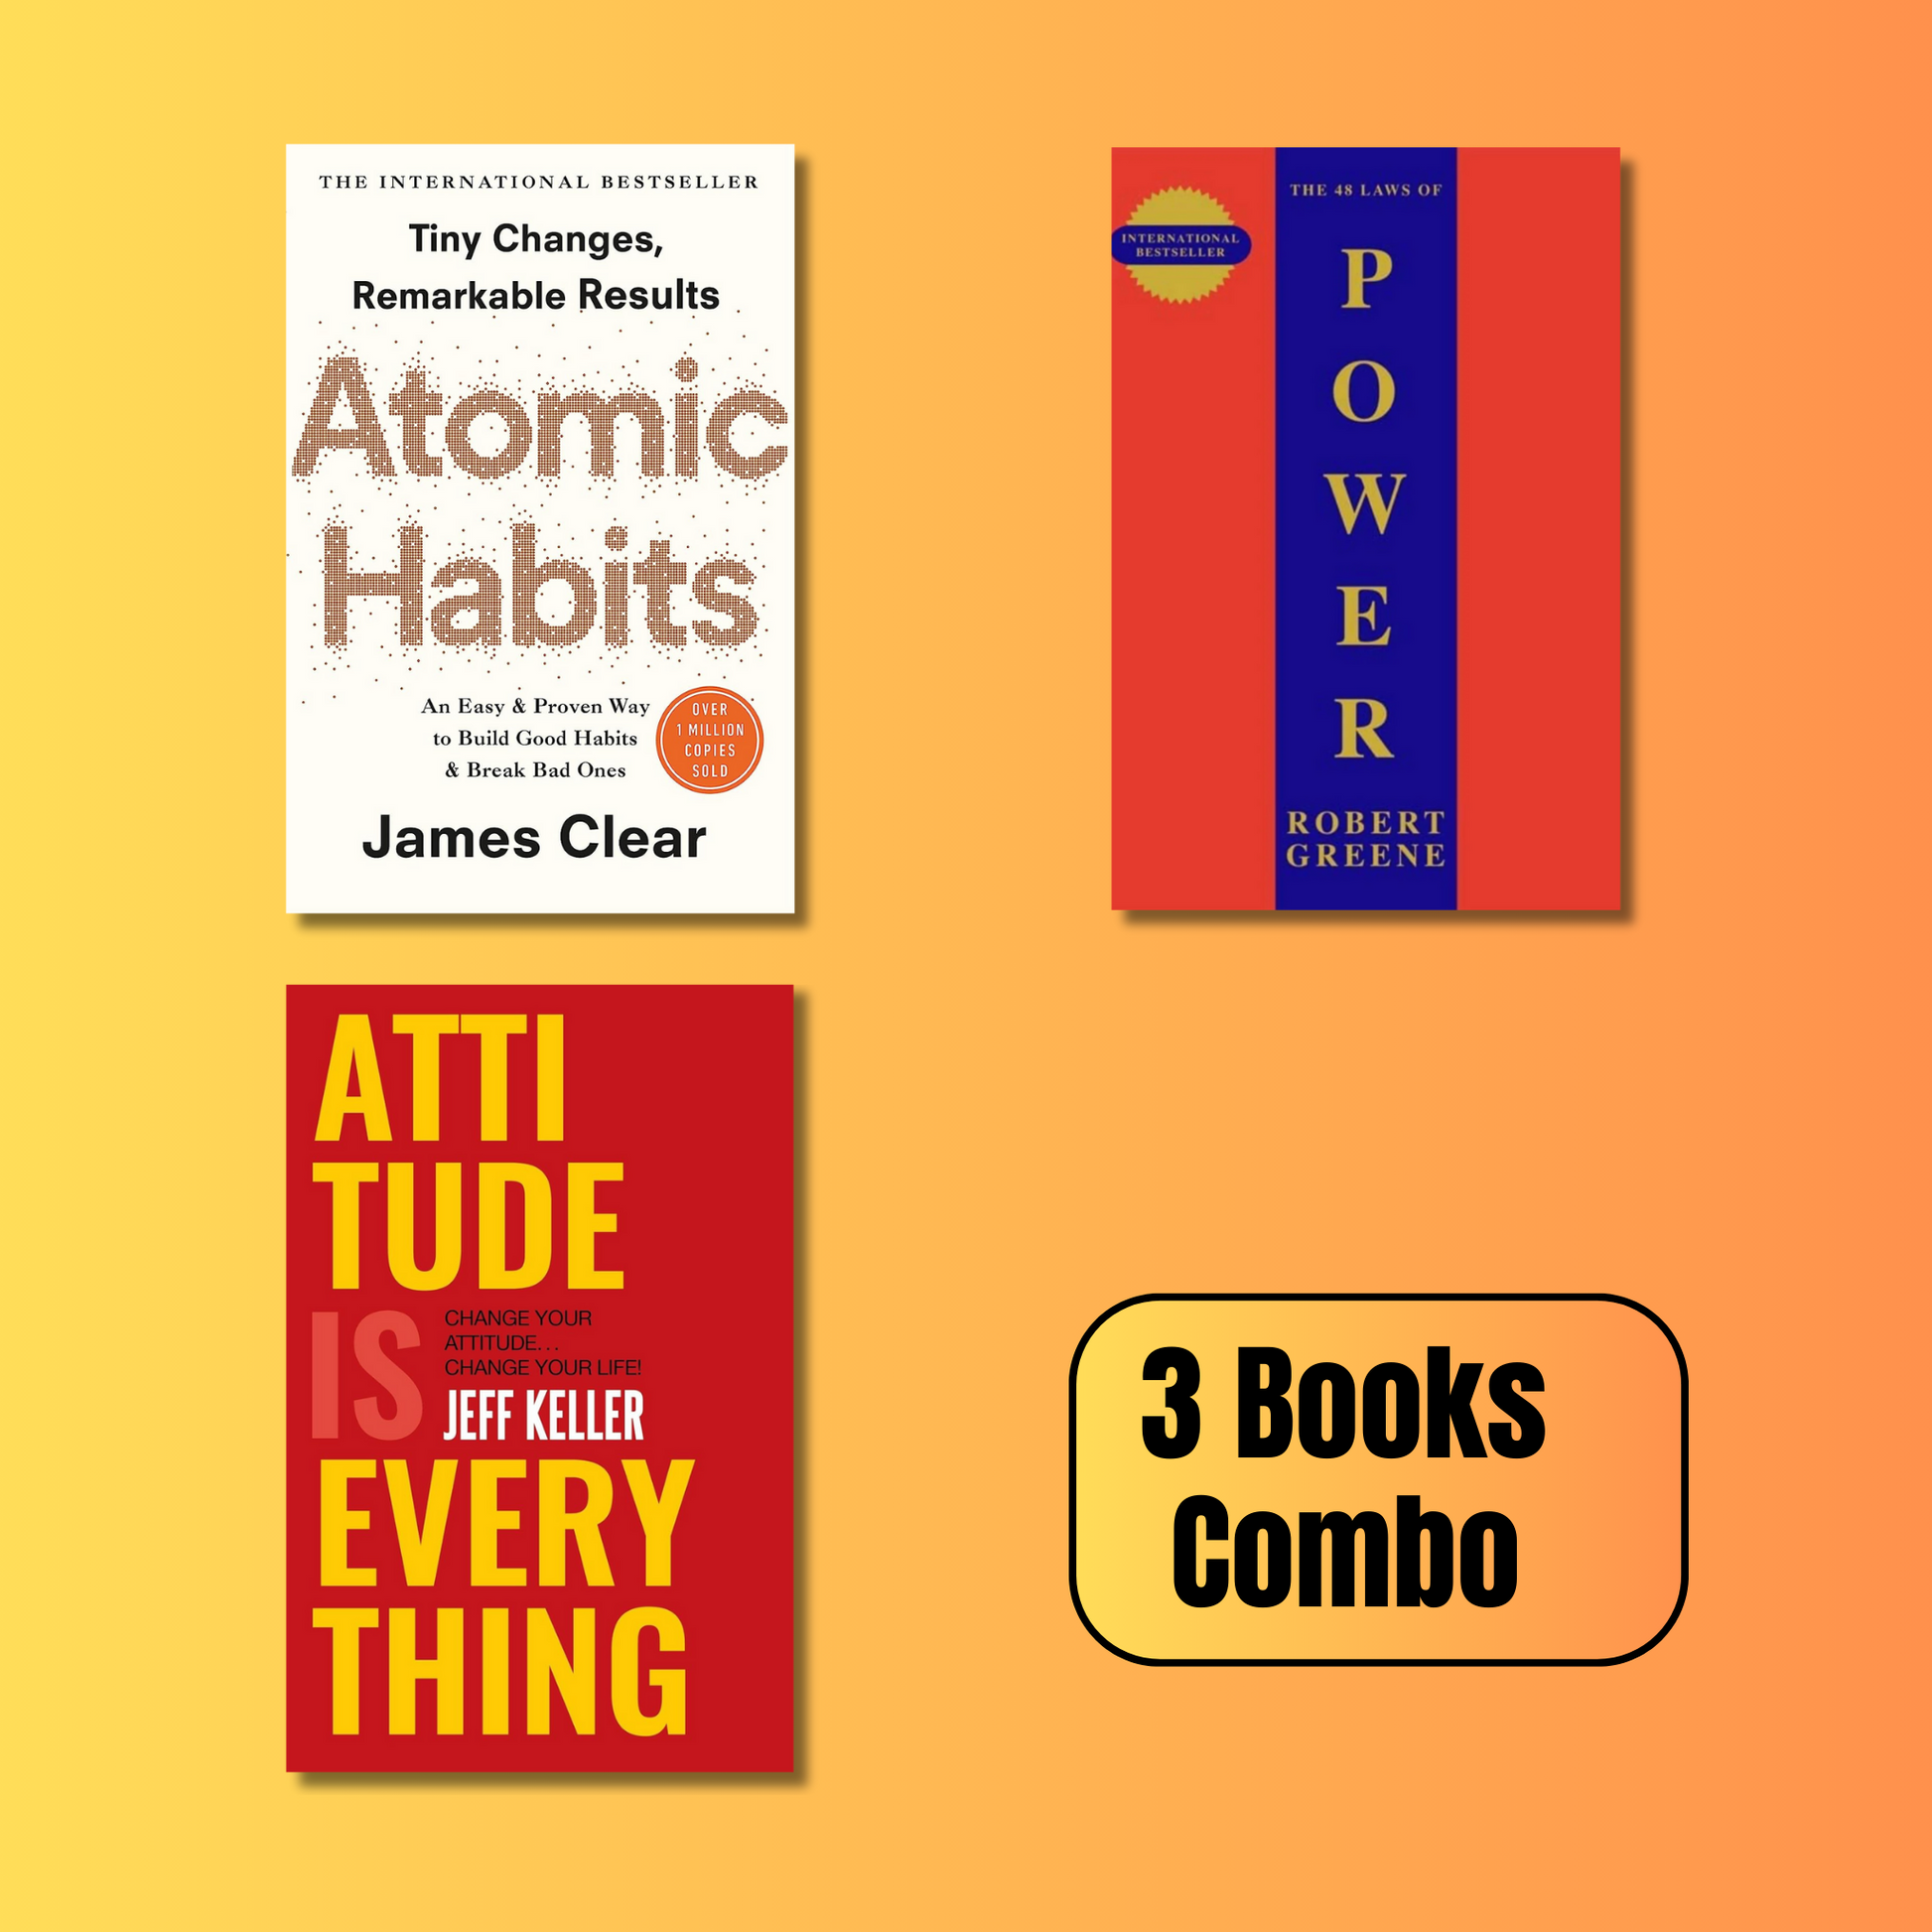 Combo] Atomic Habit-48 Laws Of Power-Attitude Is Everything